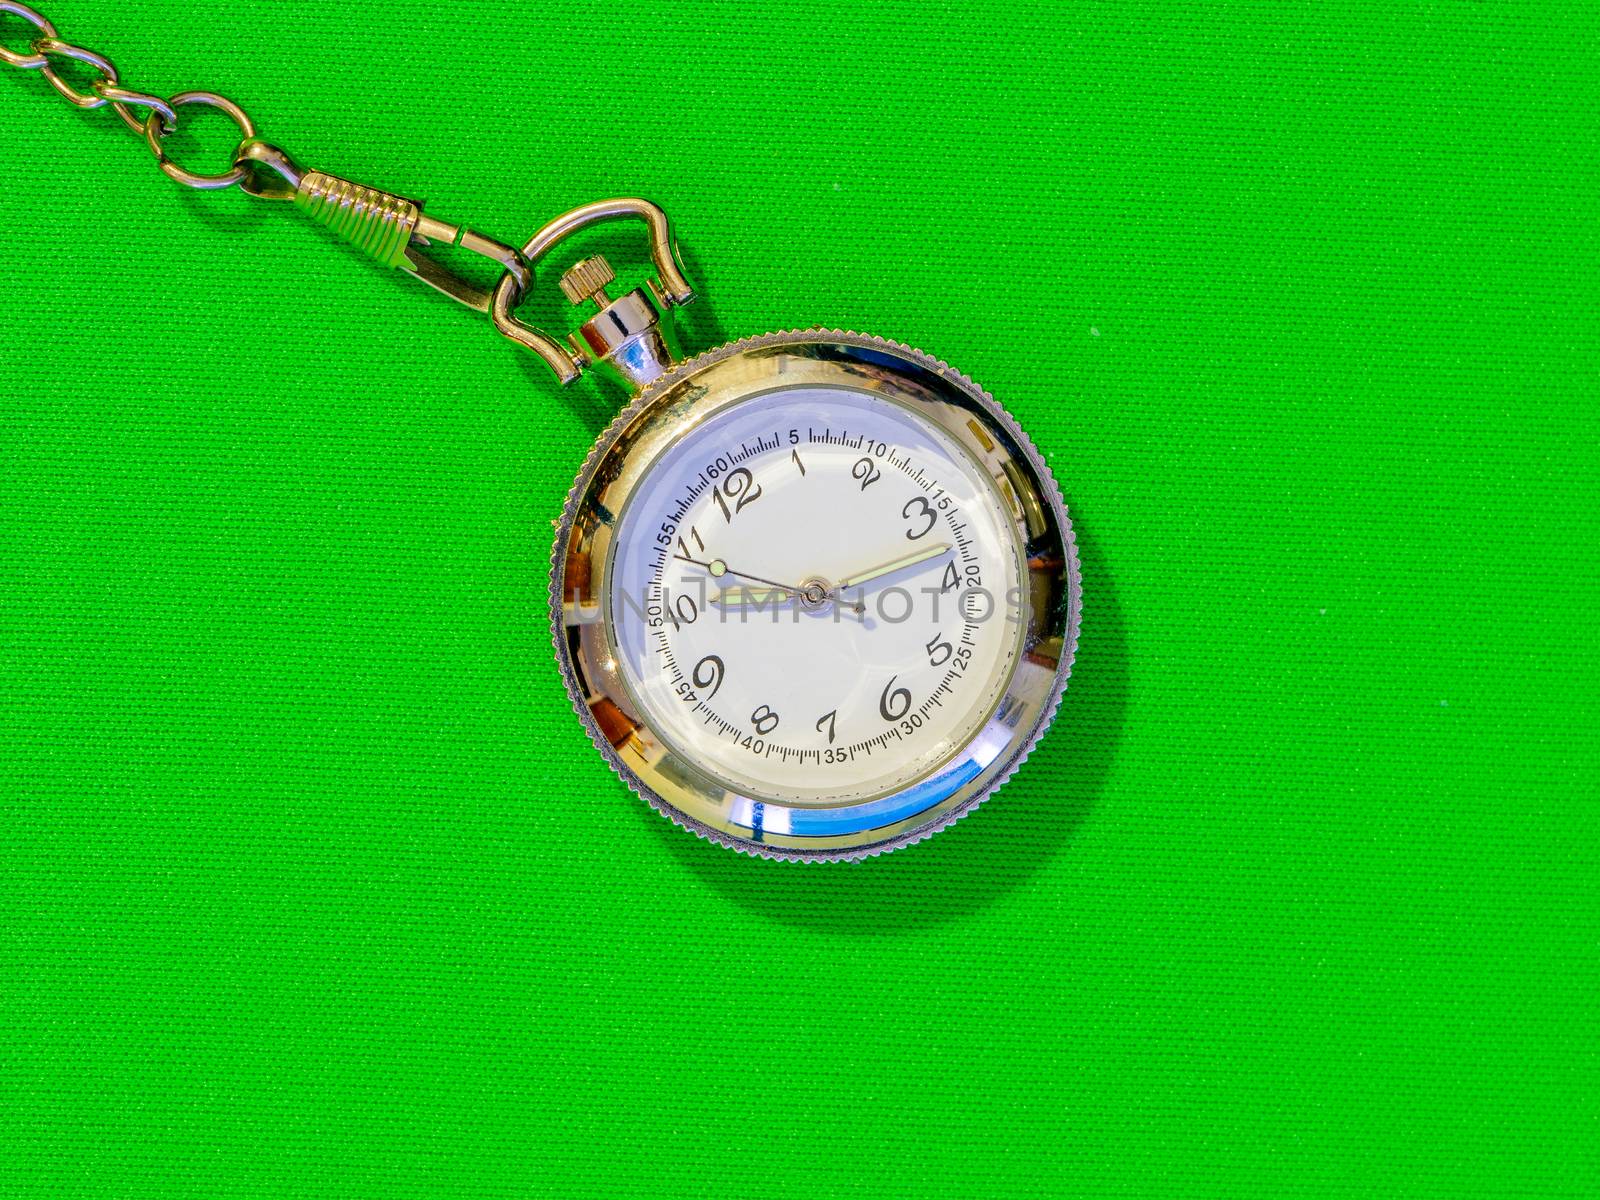 Small steel pocket watch with white dial, metal object on a uniform colored background